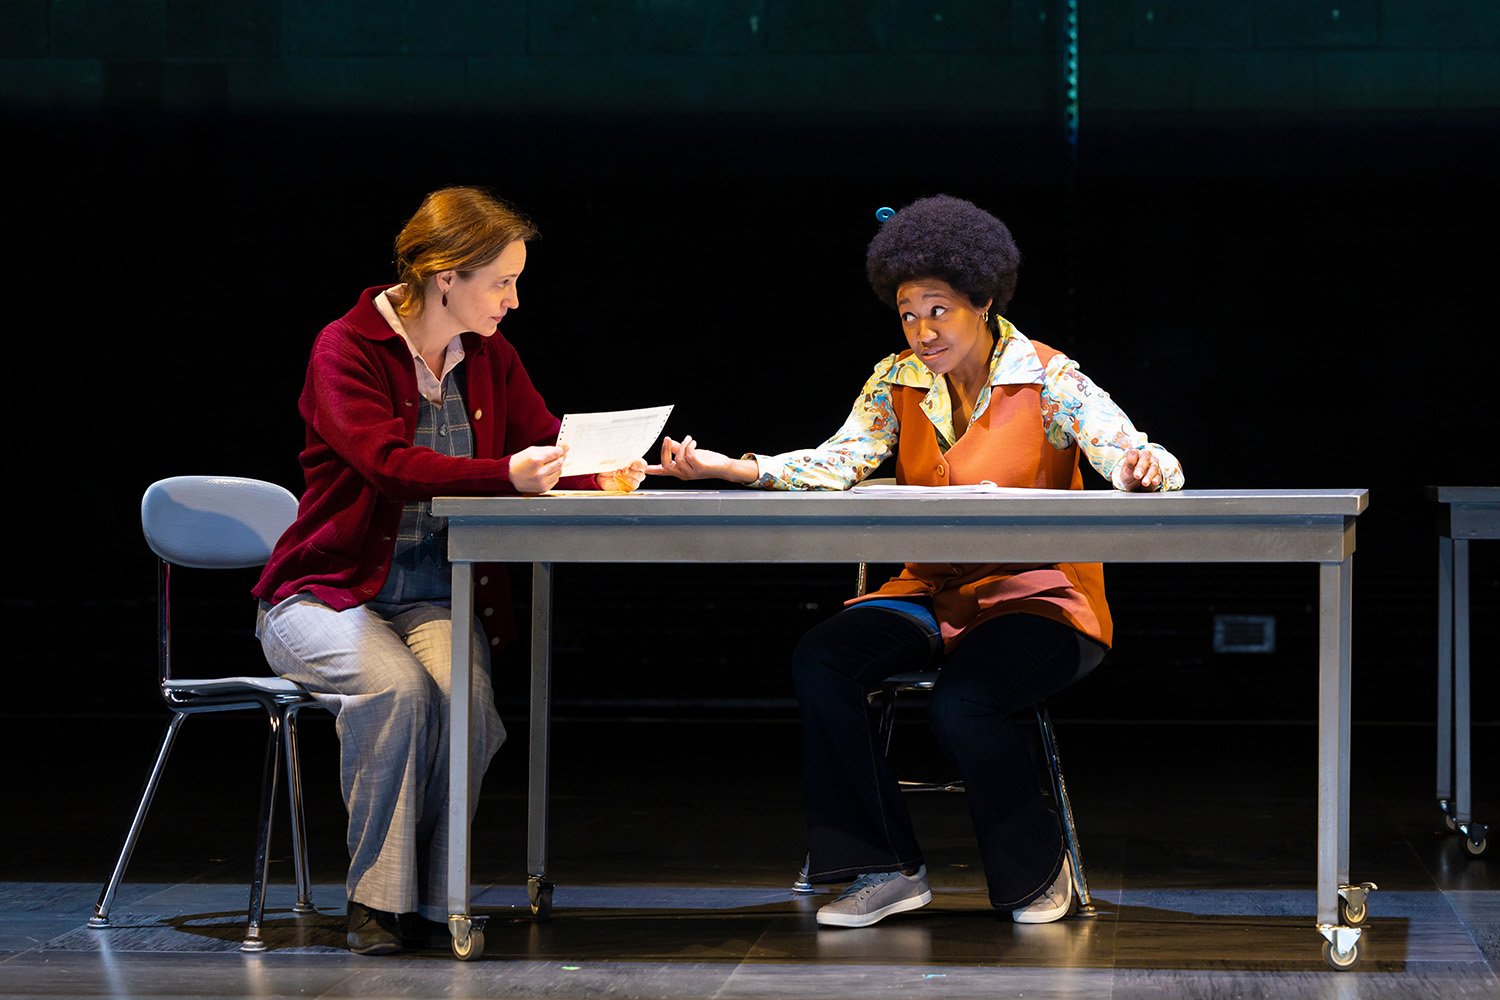 Photo of Stacy Fischer (left) and Elle Borders in a scene from "Common Ground Revisited" at The Huntington. Fischer has her red hair tied back and wears a red cardigan, plaid shirt, and grey slack as she sits in a chair on the left side of a table in the middle of the stage. She holds a piece of paper in her hands. Borders sits to the right of Fischer, in the middle of the table. Her her is styled in an afro with a small blue pick in it, and she wears a floral-patterned collared shirt, burnt orange dress overtop the shirt, and jeans.